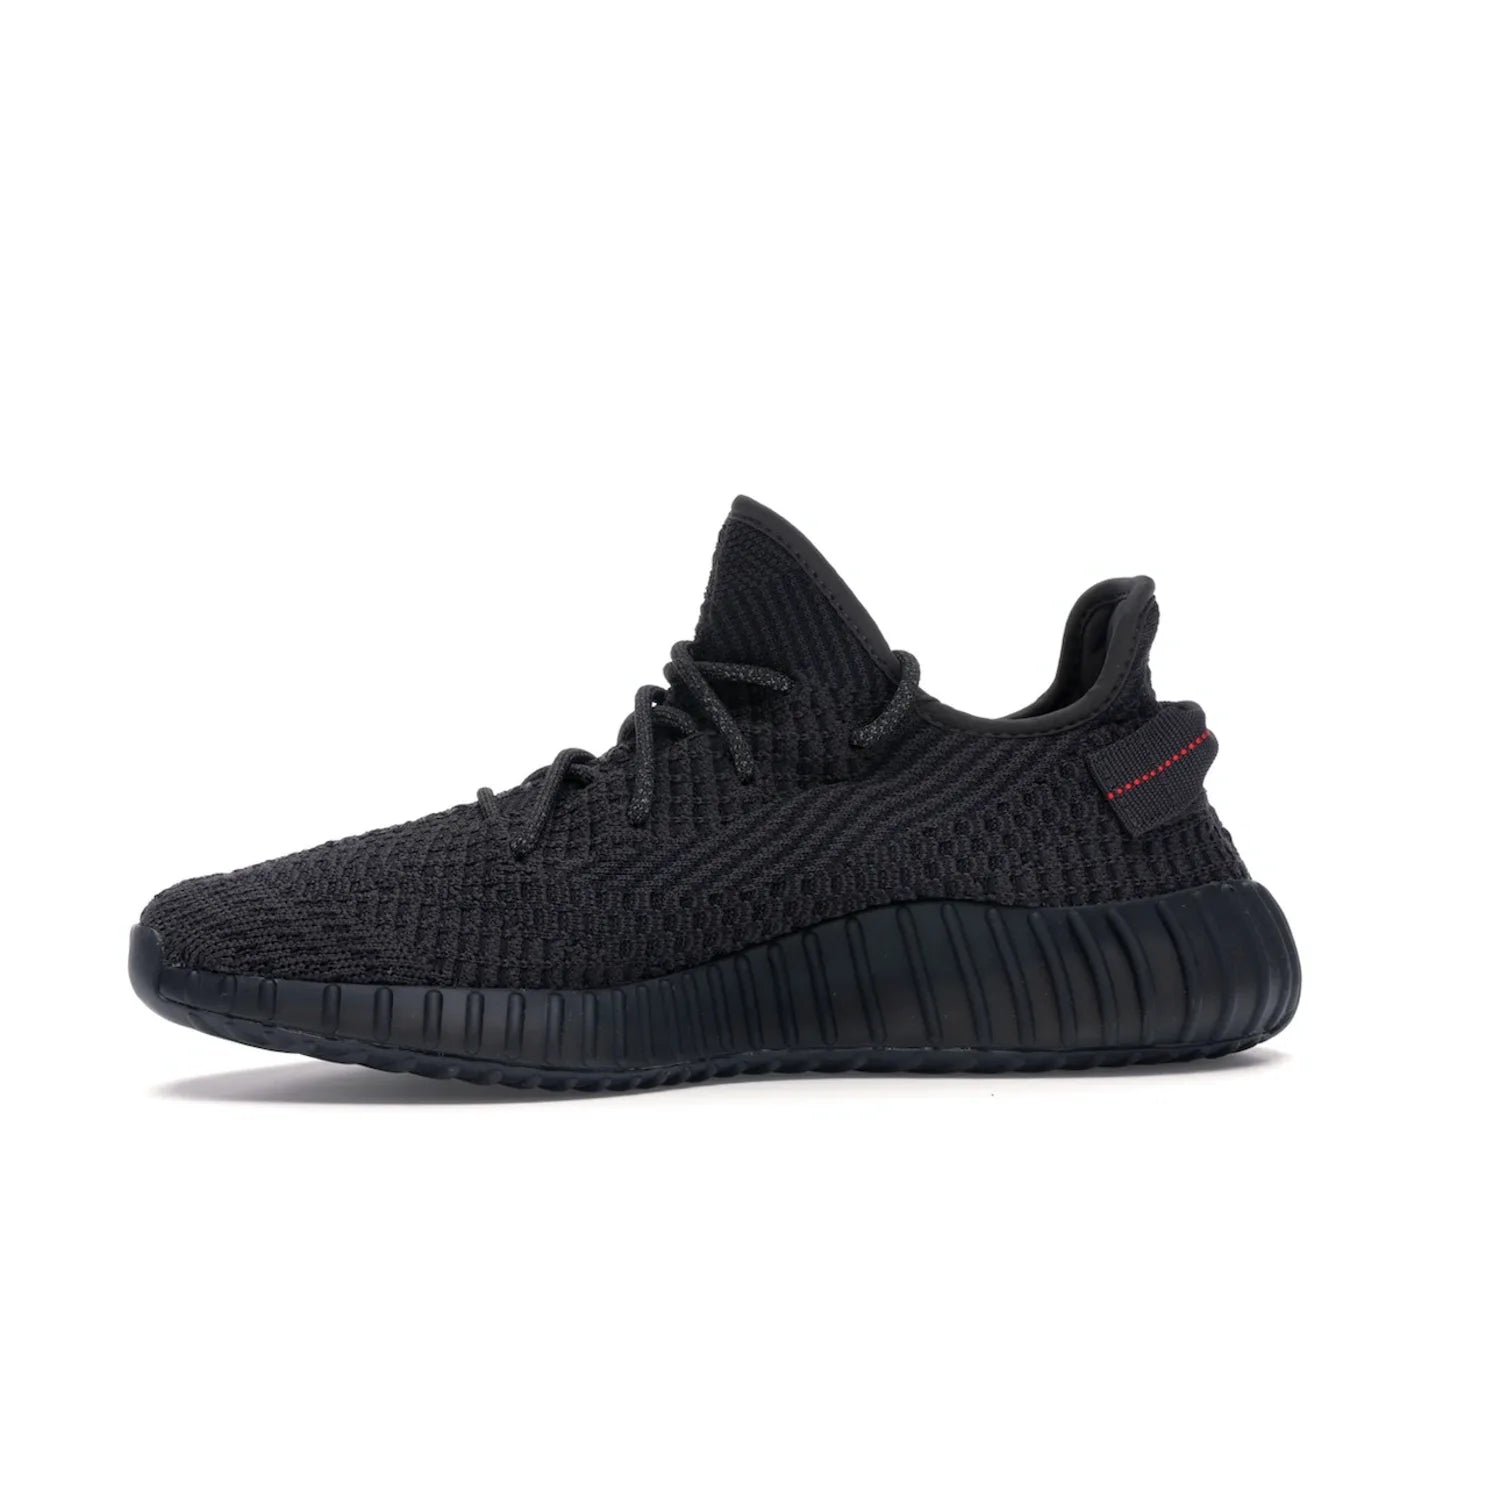 adidas Yeezy Boost 350 V2 Black (Non-Reflective) - Image 18 - Only at www.BallersClubKickz.com - A timeless, sleek silhouette crafted from quality materials. The adidas Yeezy Boost 350 V2 Black (Non-Reflective) brings style and sophistication. Get yours now!